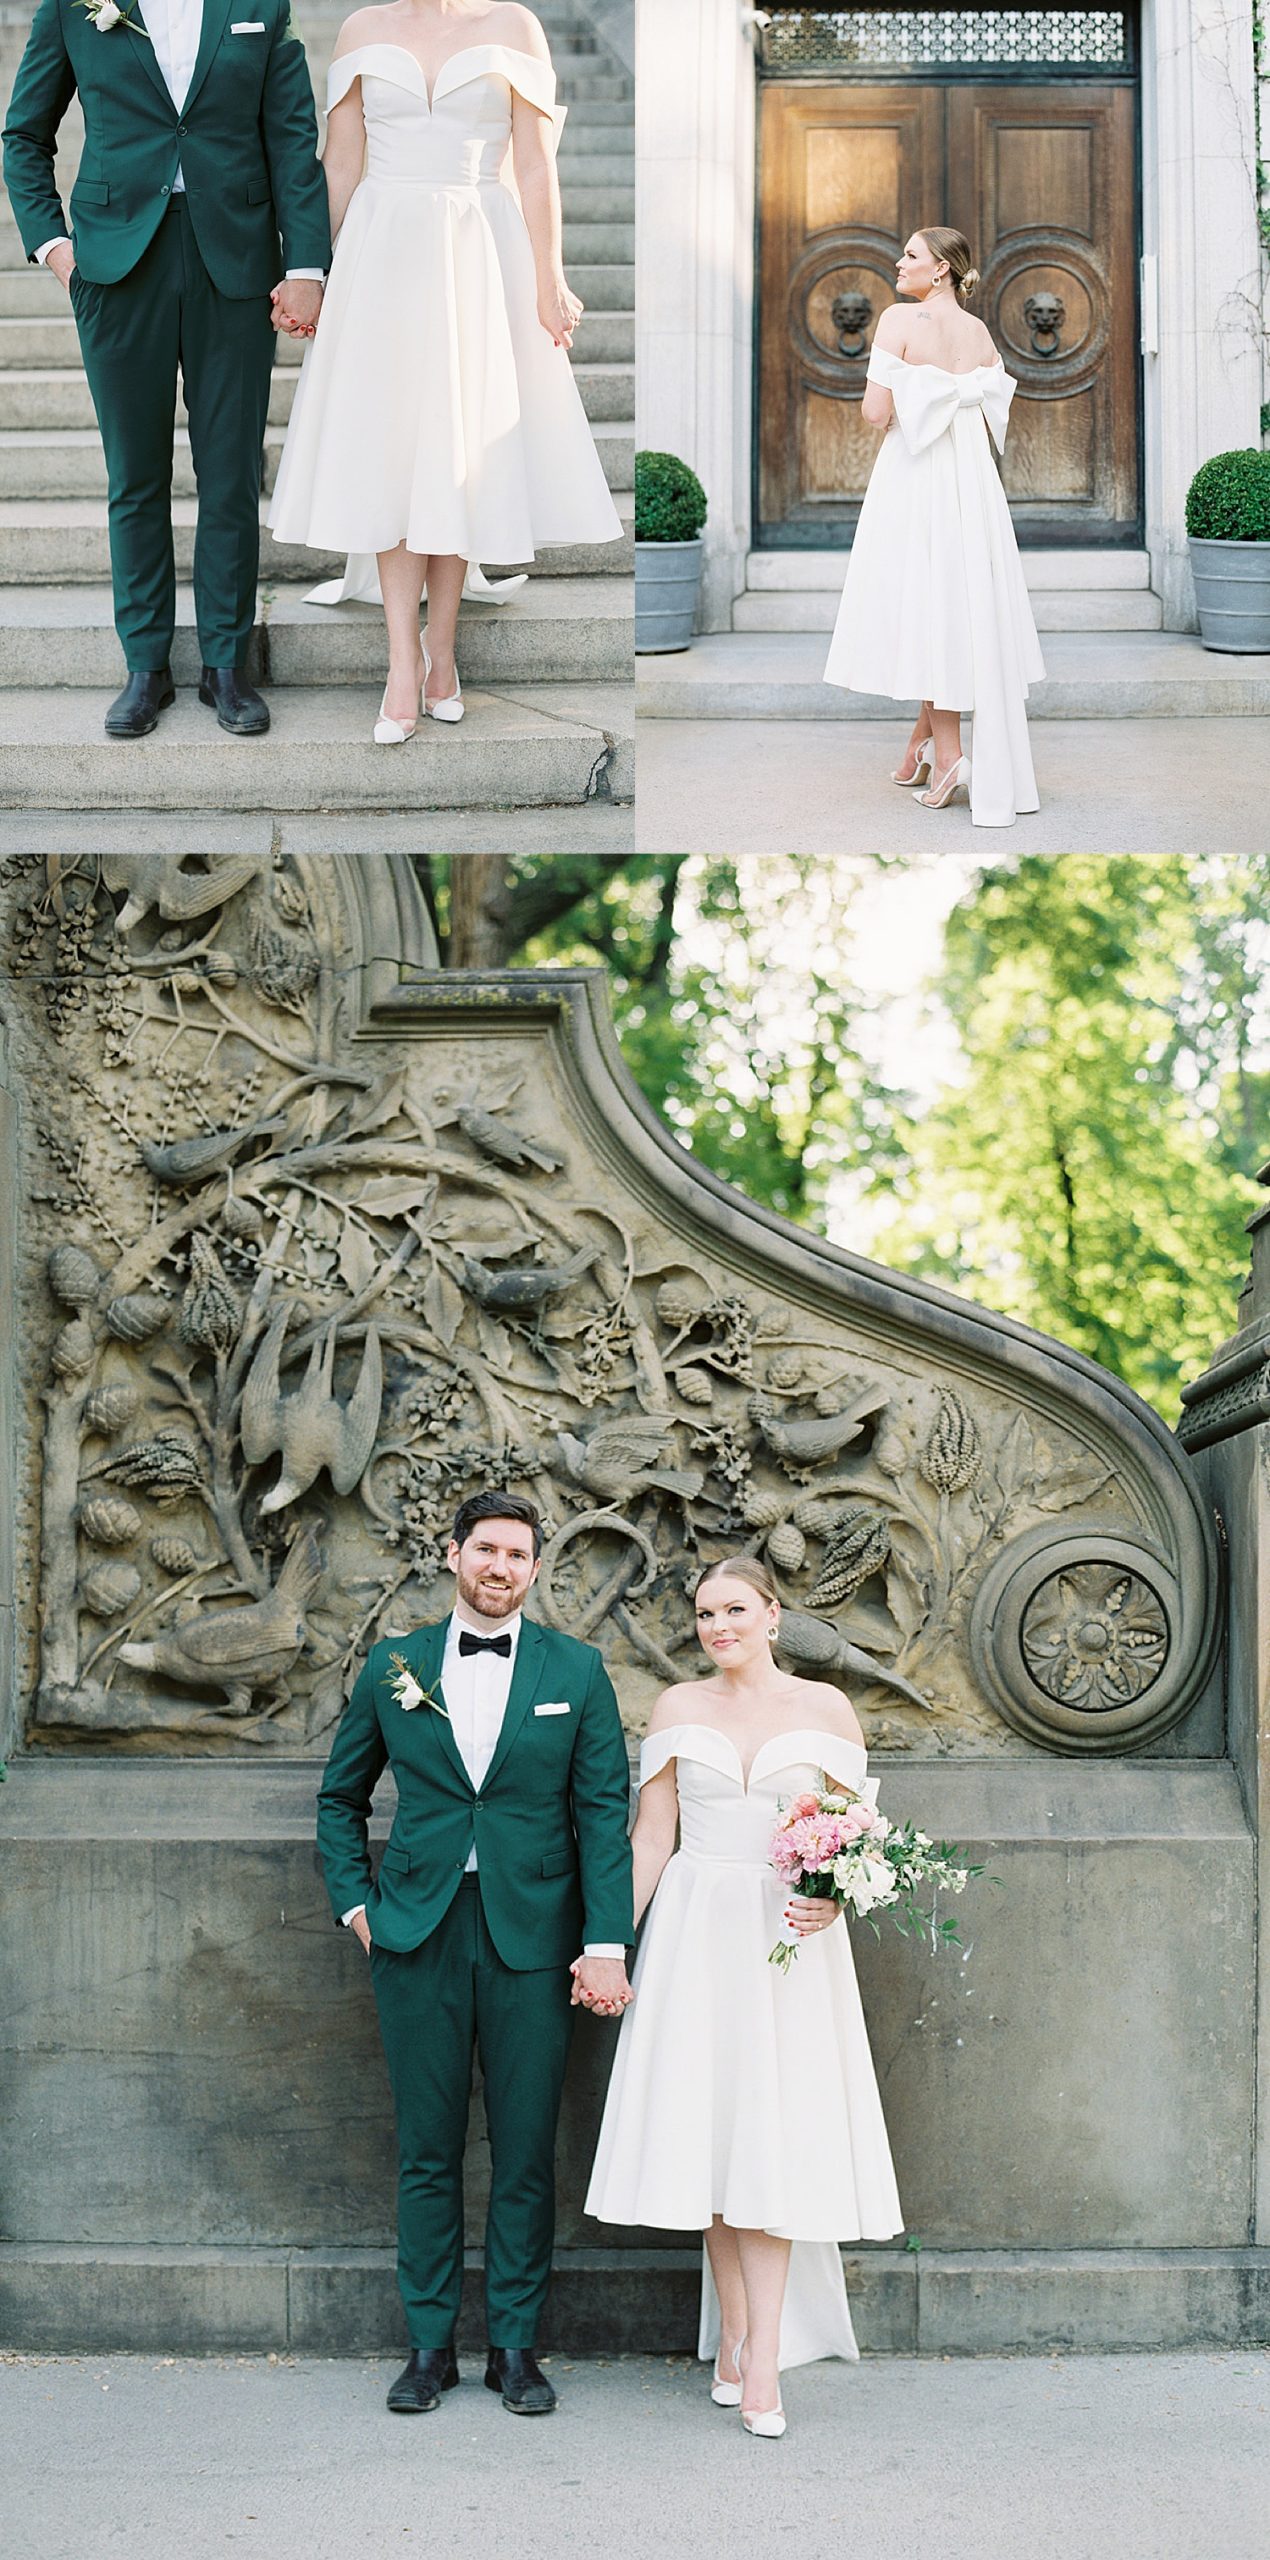 bride is wearing a vintage wedding dress and groom is wearing an emerald green suit with a black bowtie